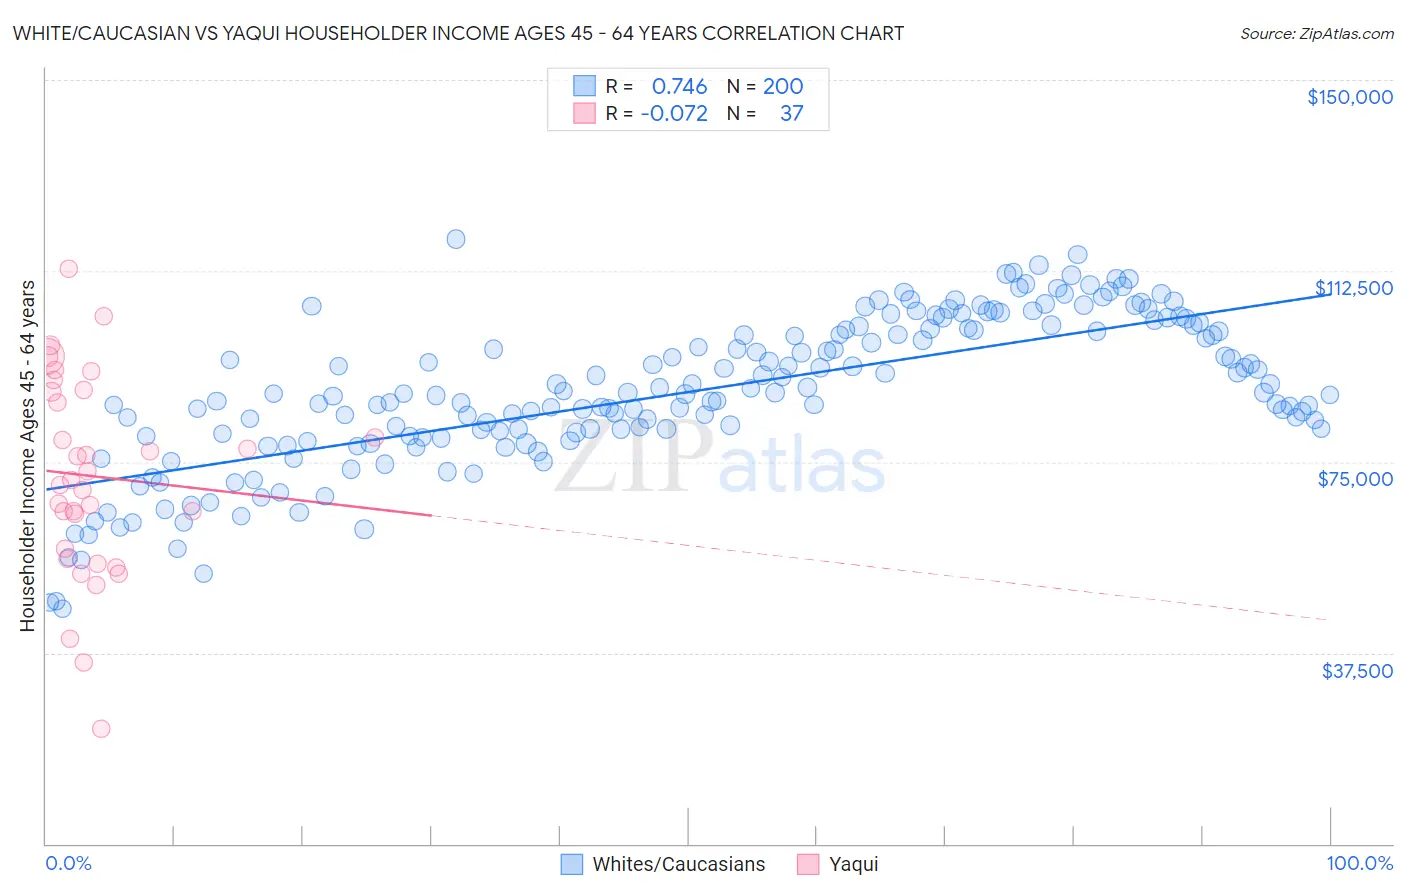 White/Caucasian vs Yaqui Householder Income Ages 45 - 64 years